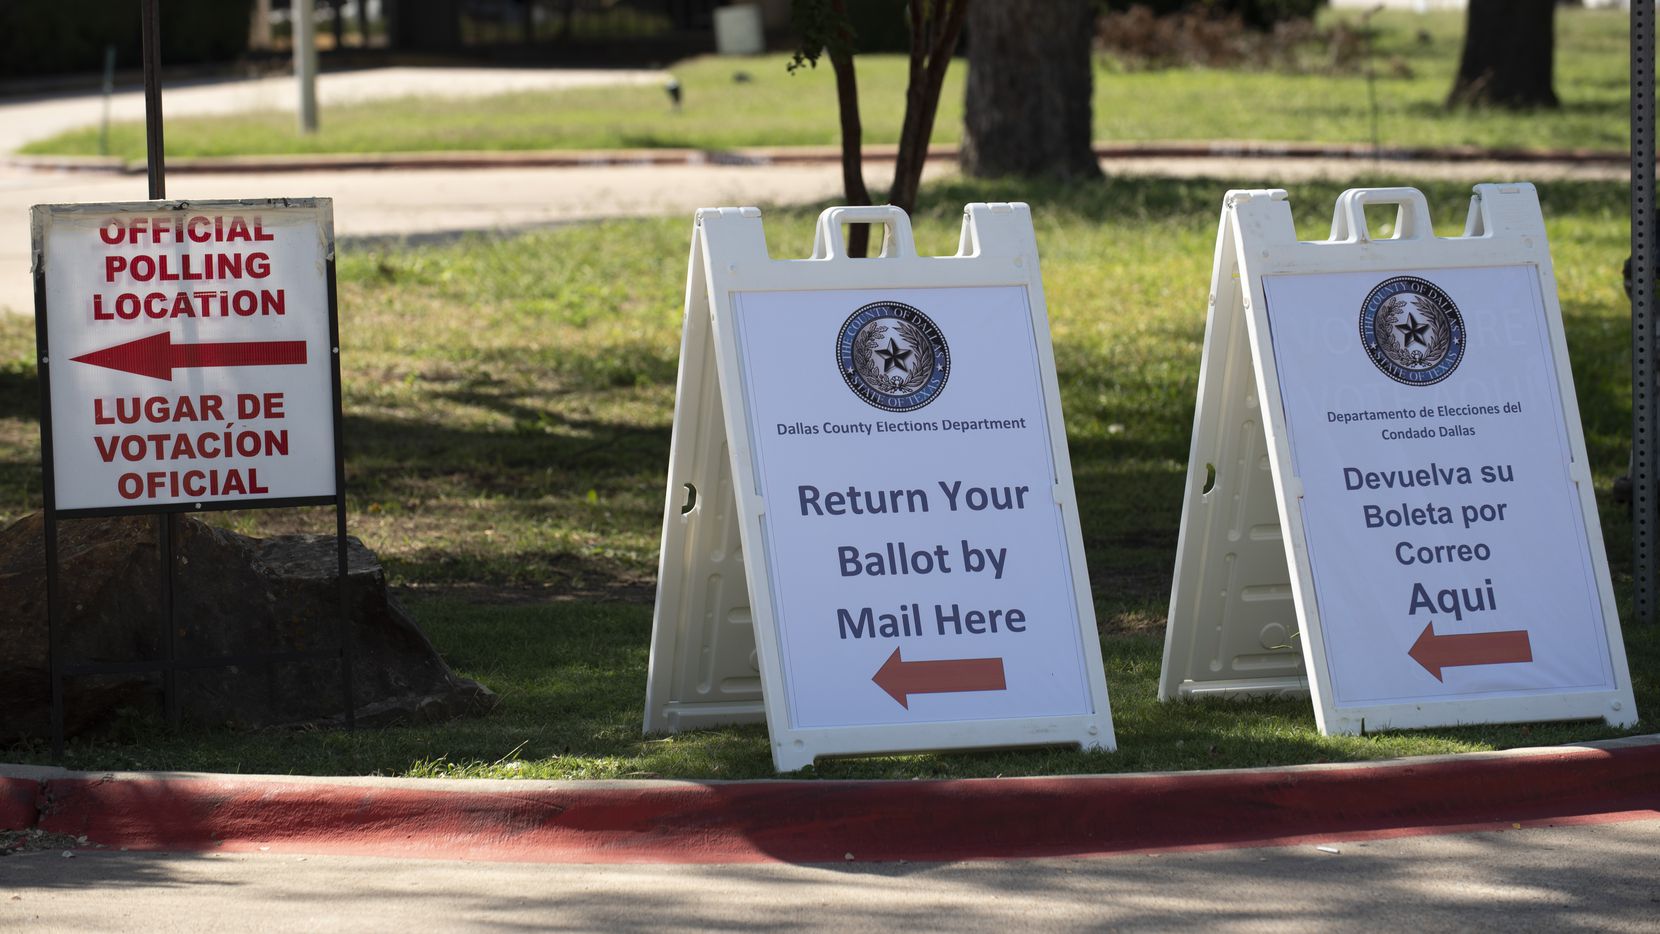 Texans must register to vote by Oct. 11 to vote in the November election.